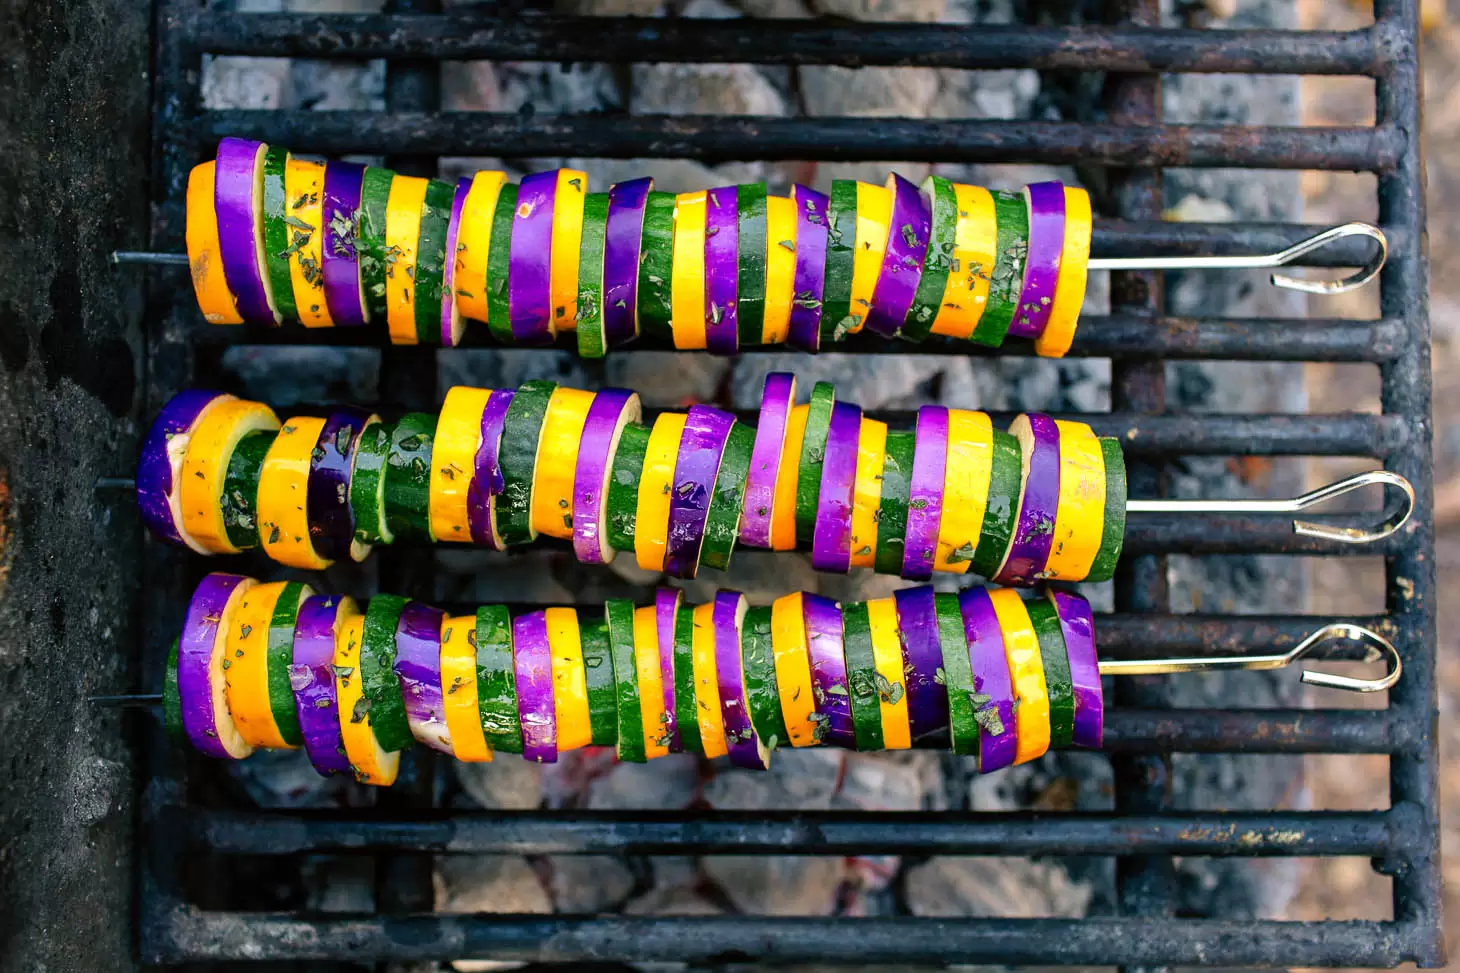 Eggplant, zuchinni, and yellow squash skewers on a campfire grill